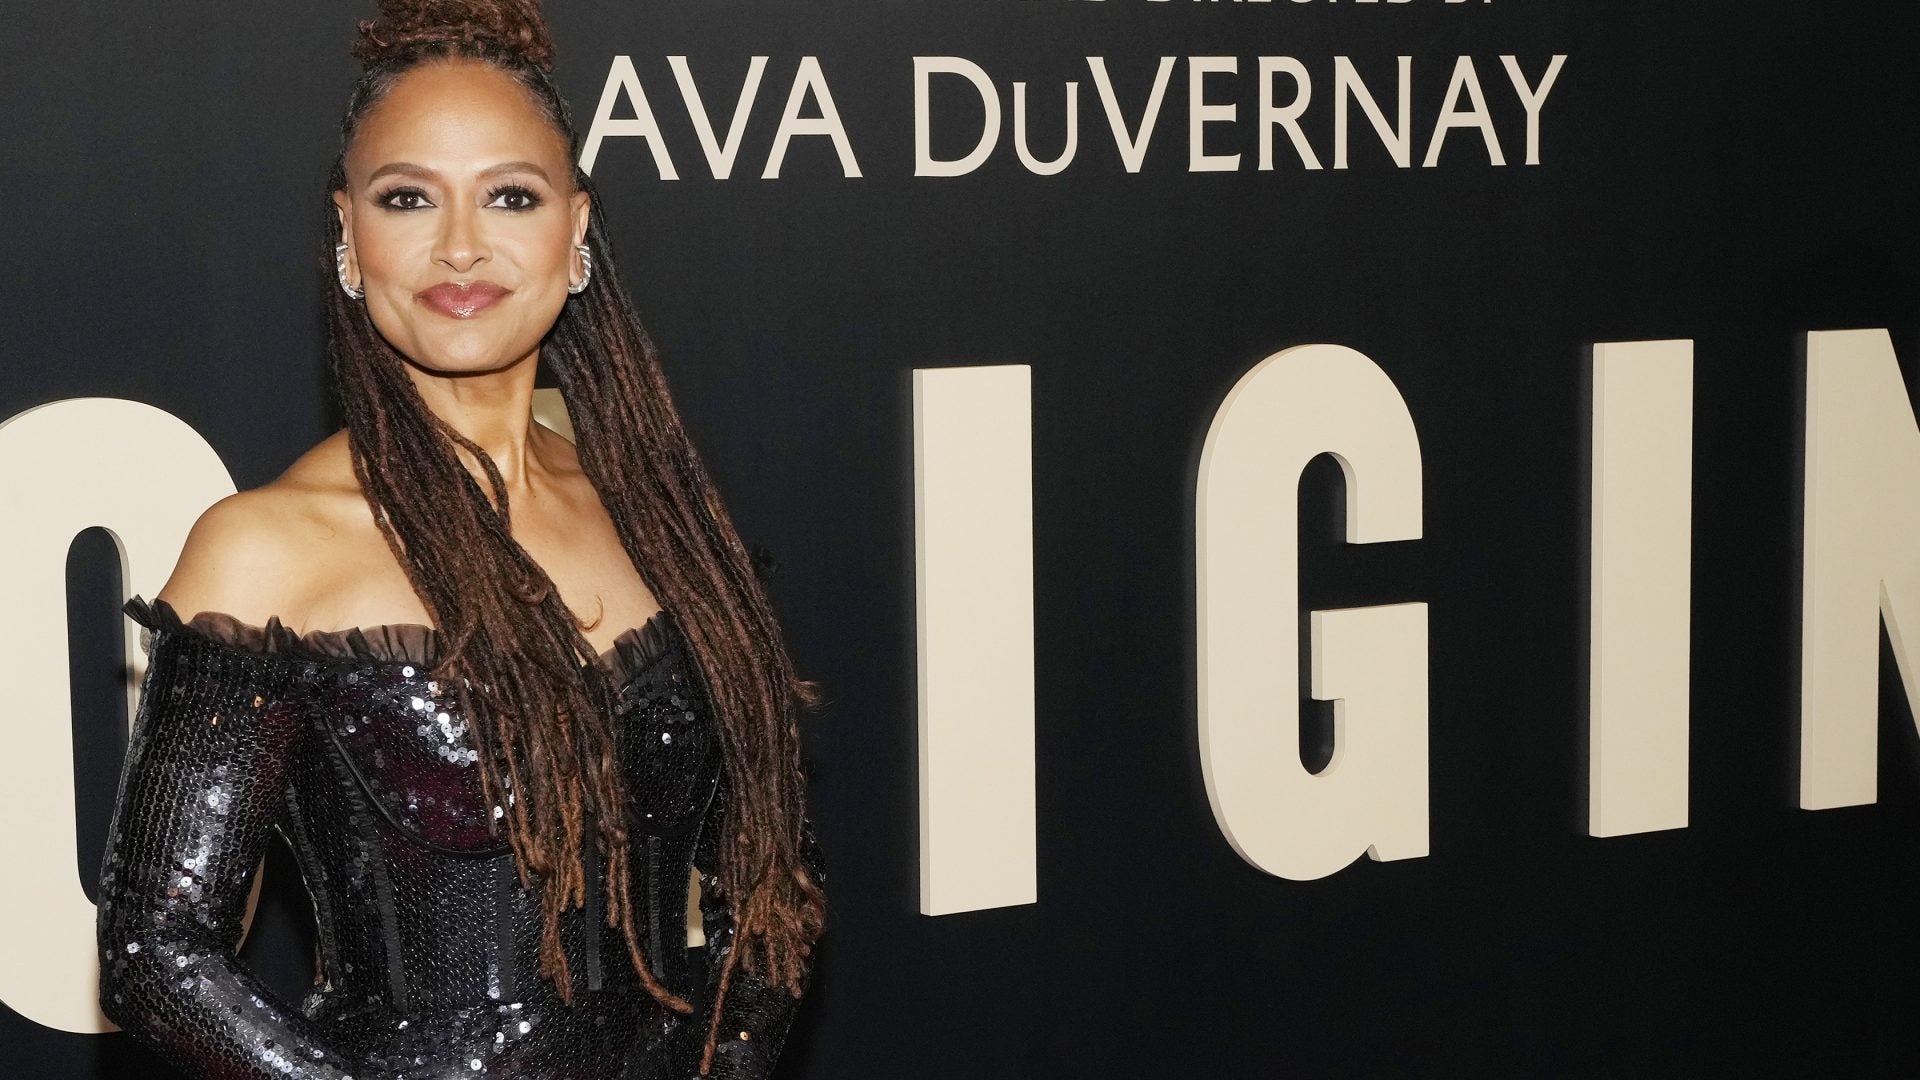 Ava DuVernay Questions Everything In New Film and Traces Back To Humanity’s ‘Origin’